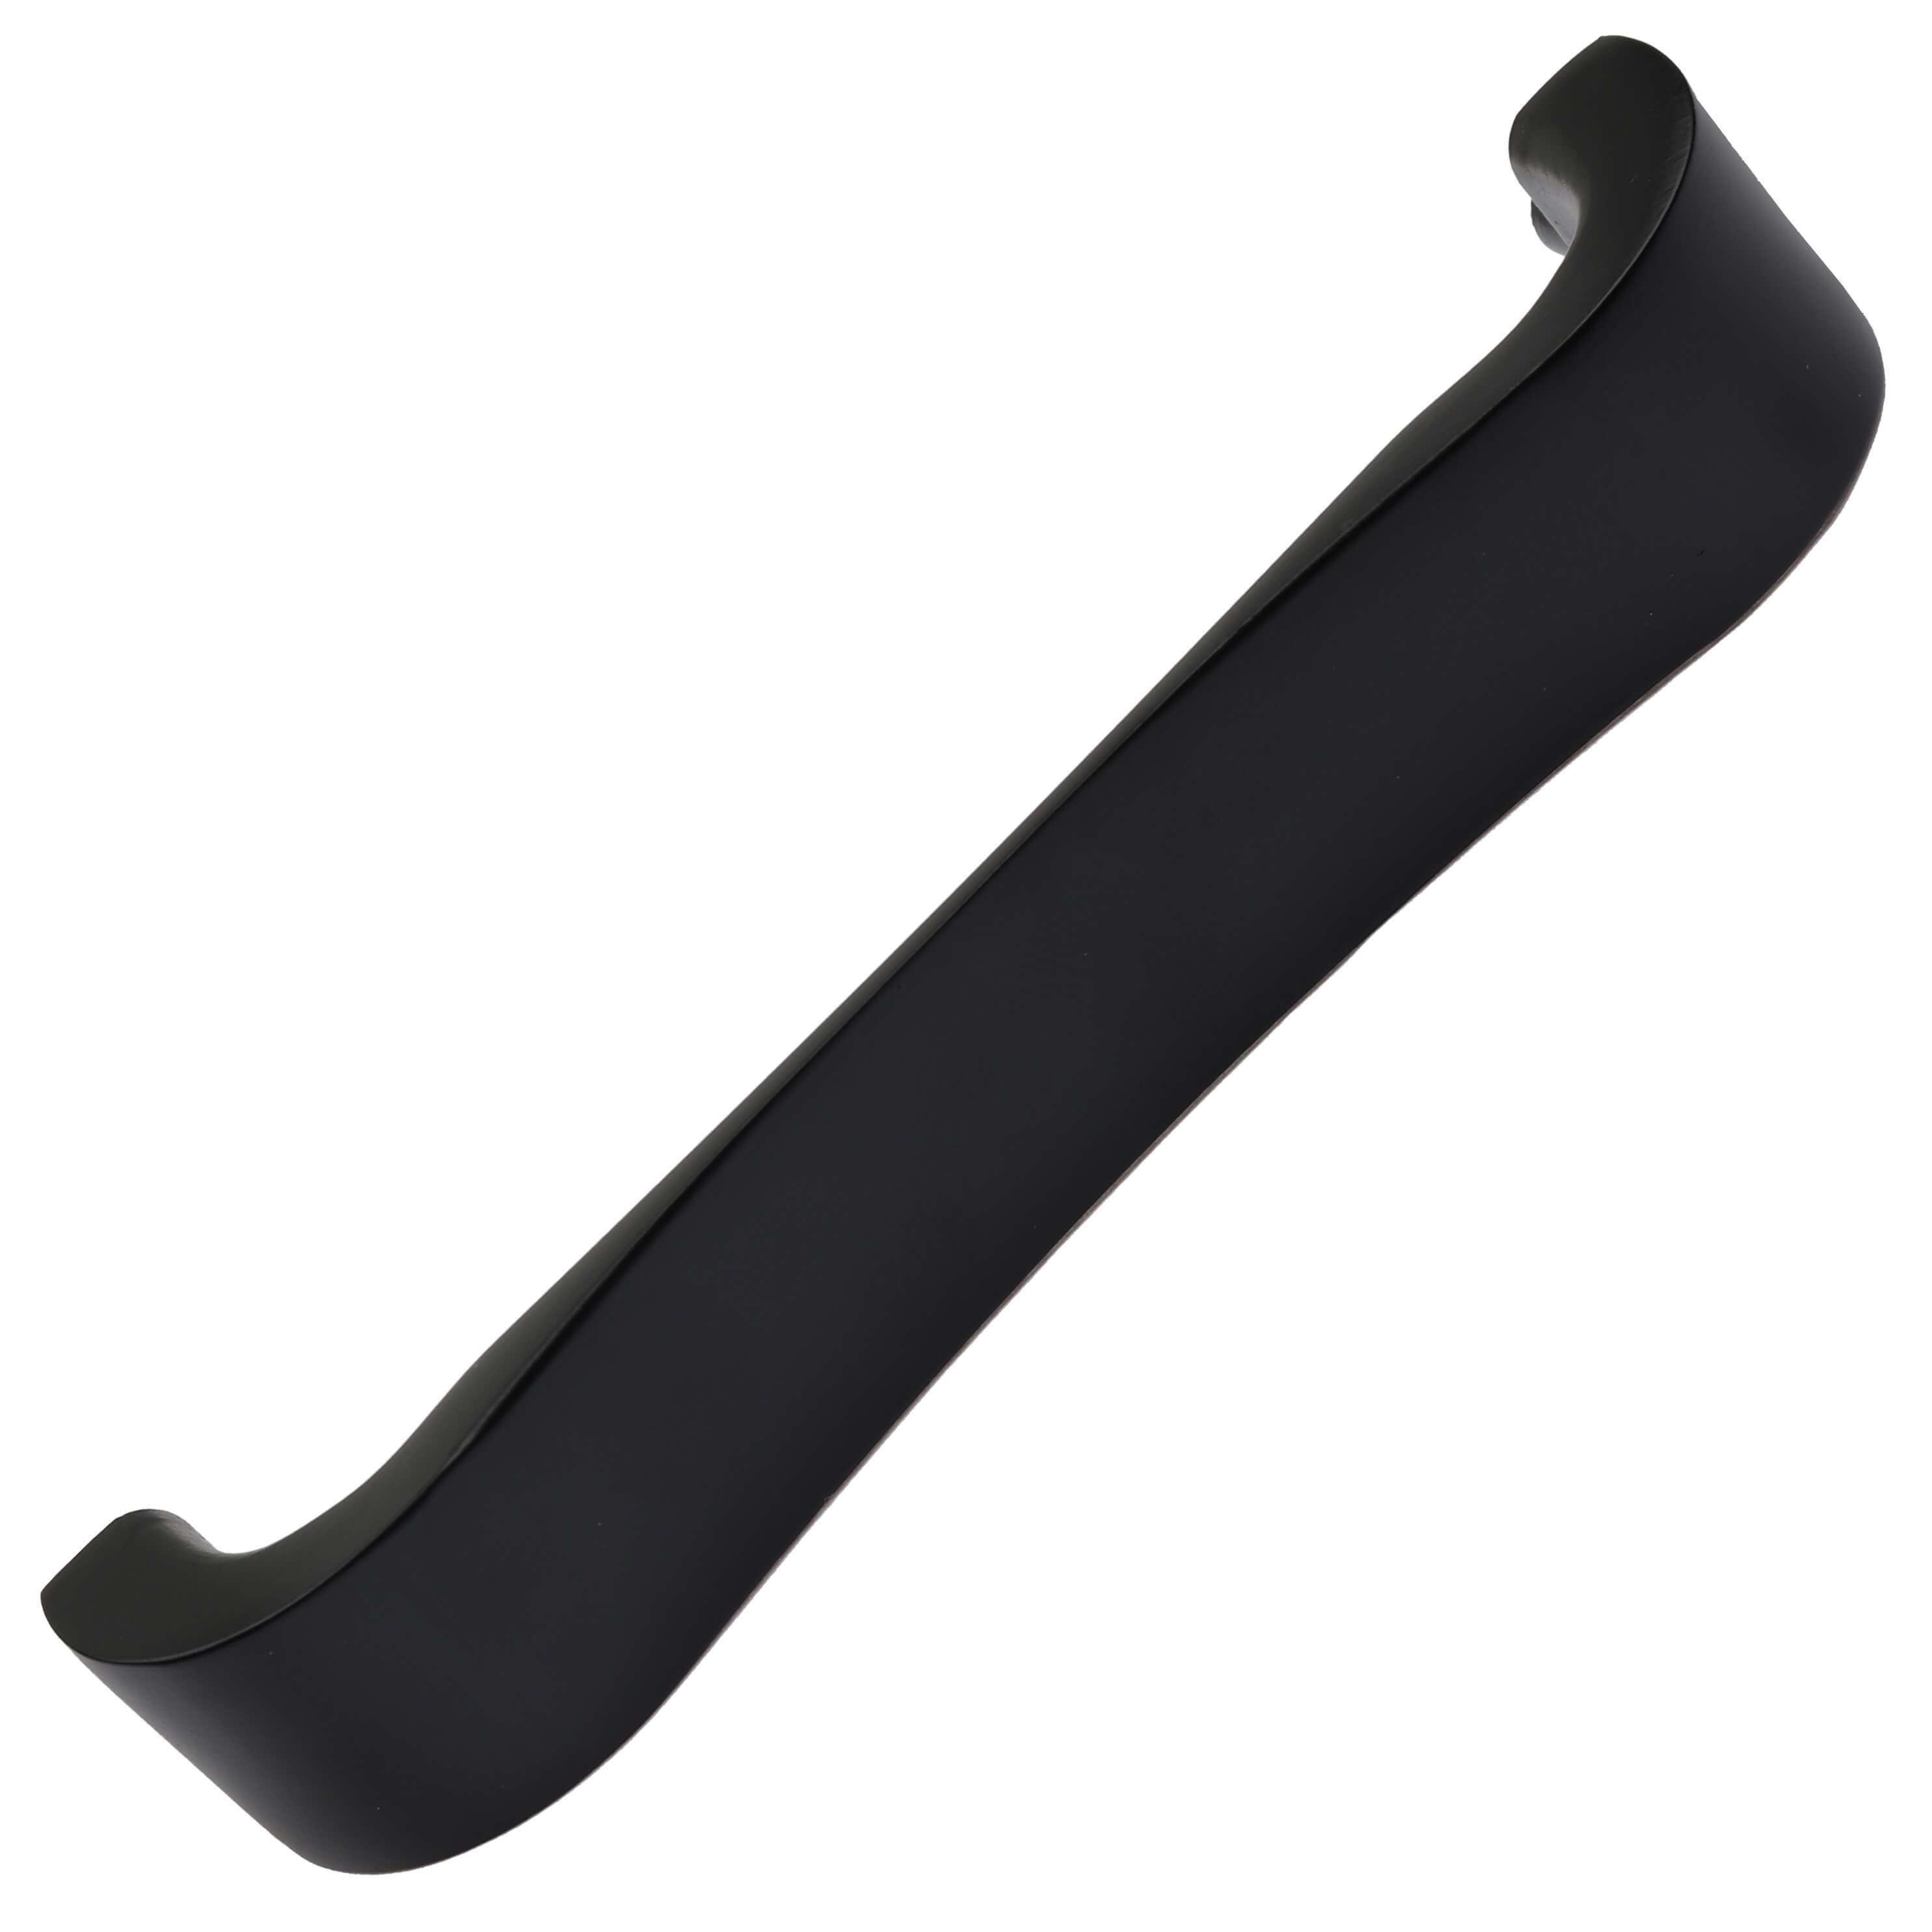 4-1/2 in. Center Smooth Curved Flat Cabinet Pull Handles, Matte Black, Pack of 10 - image 1 of 3